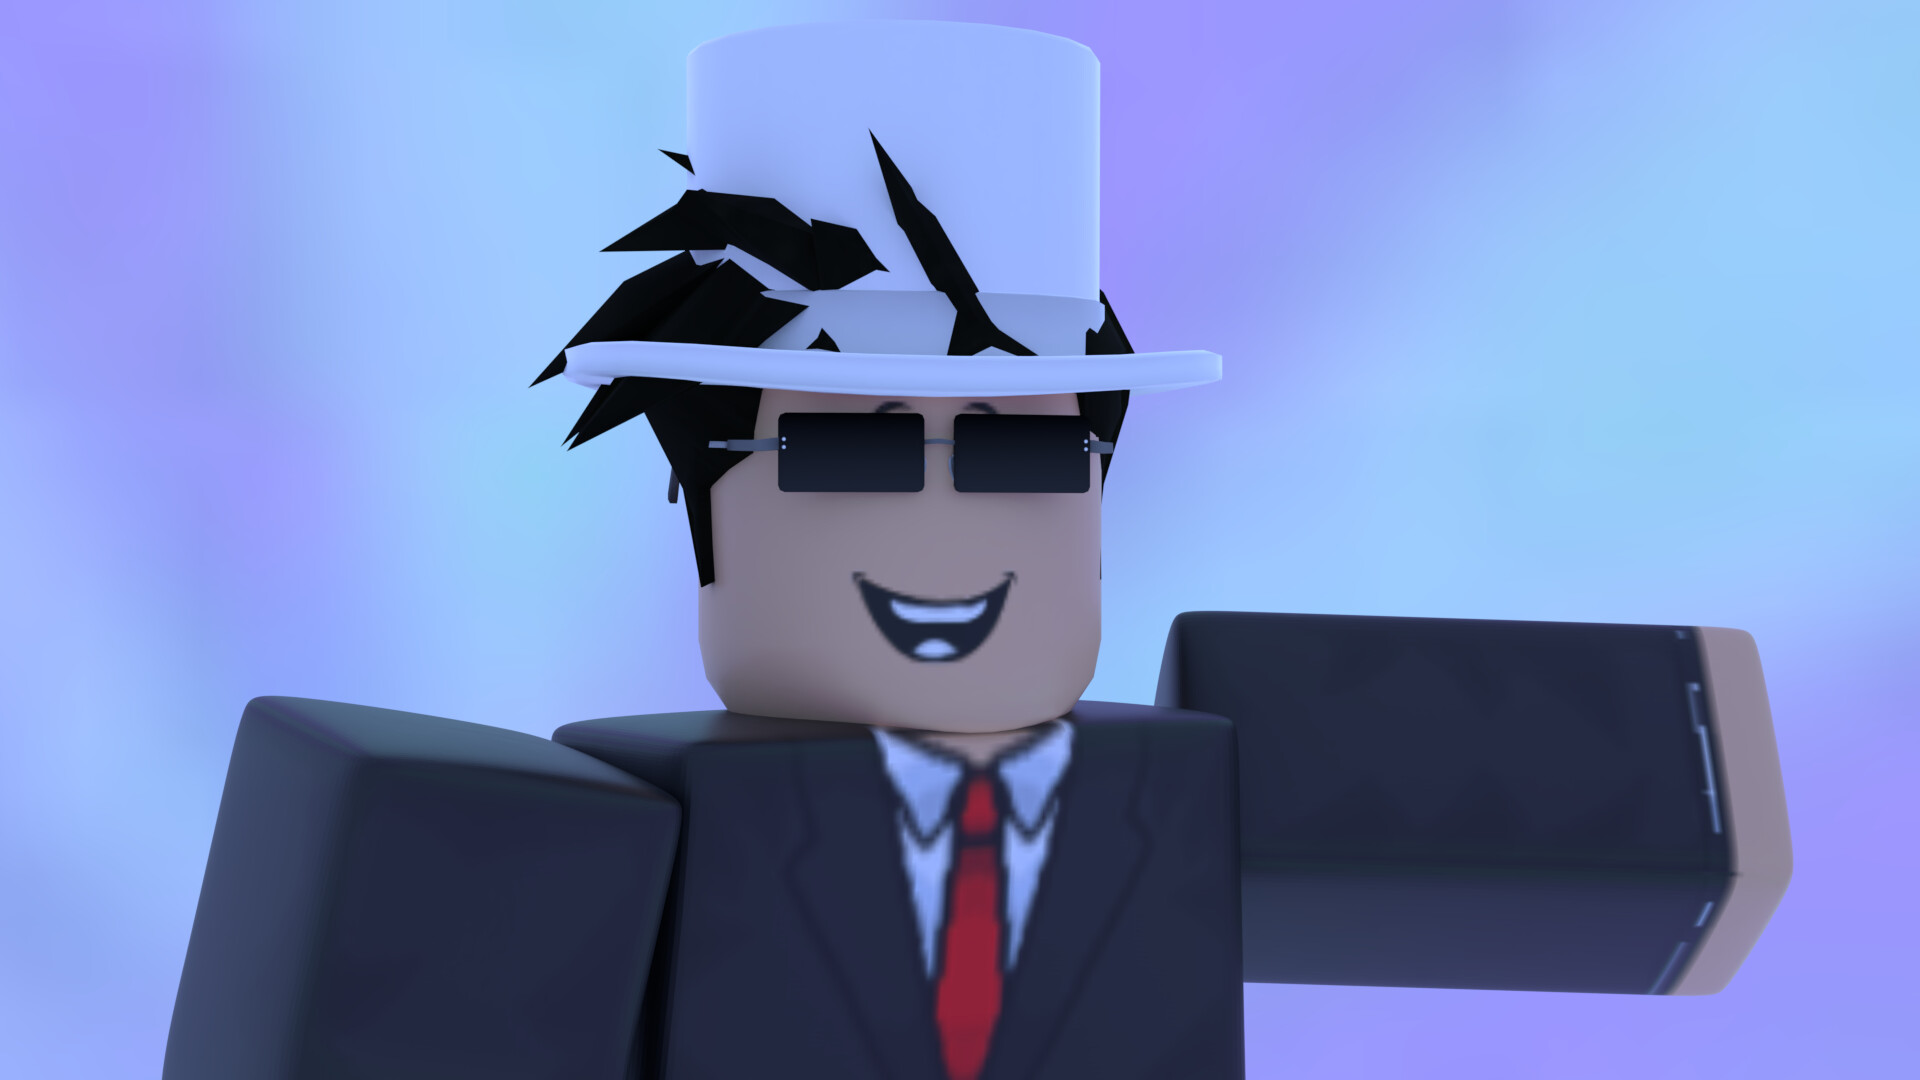 HD my avatar in roblox wallpapers